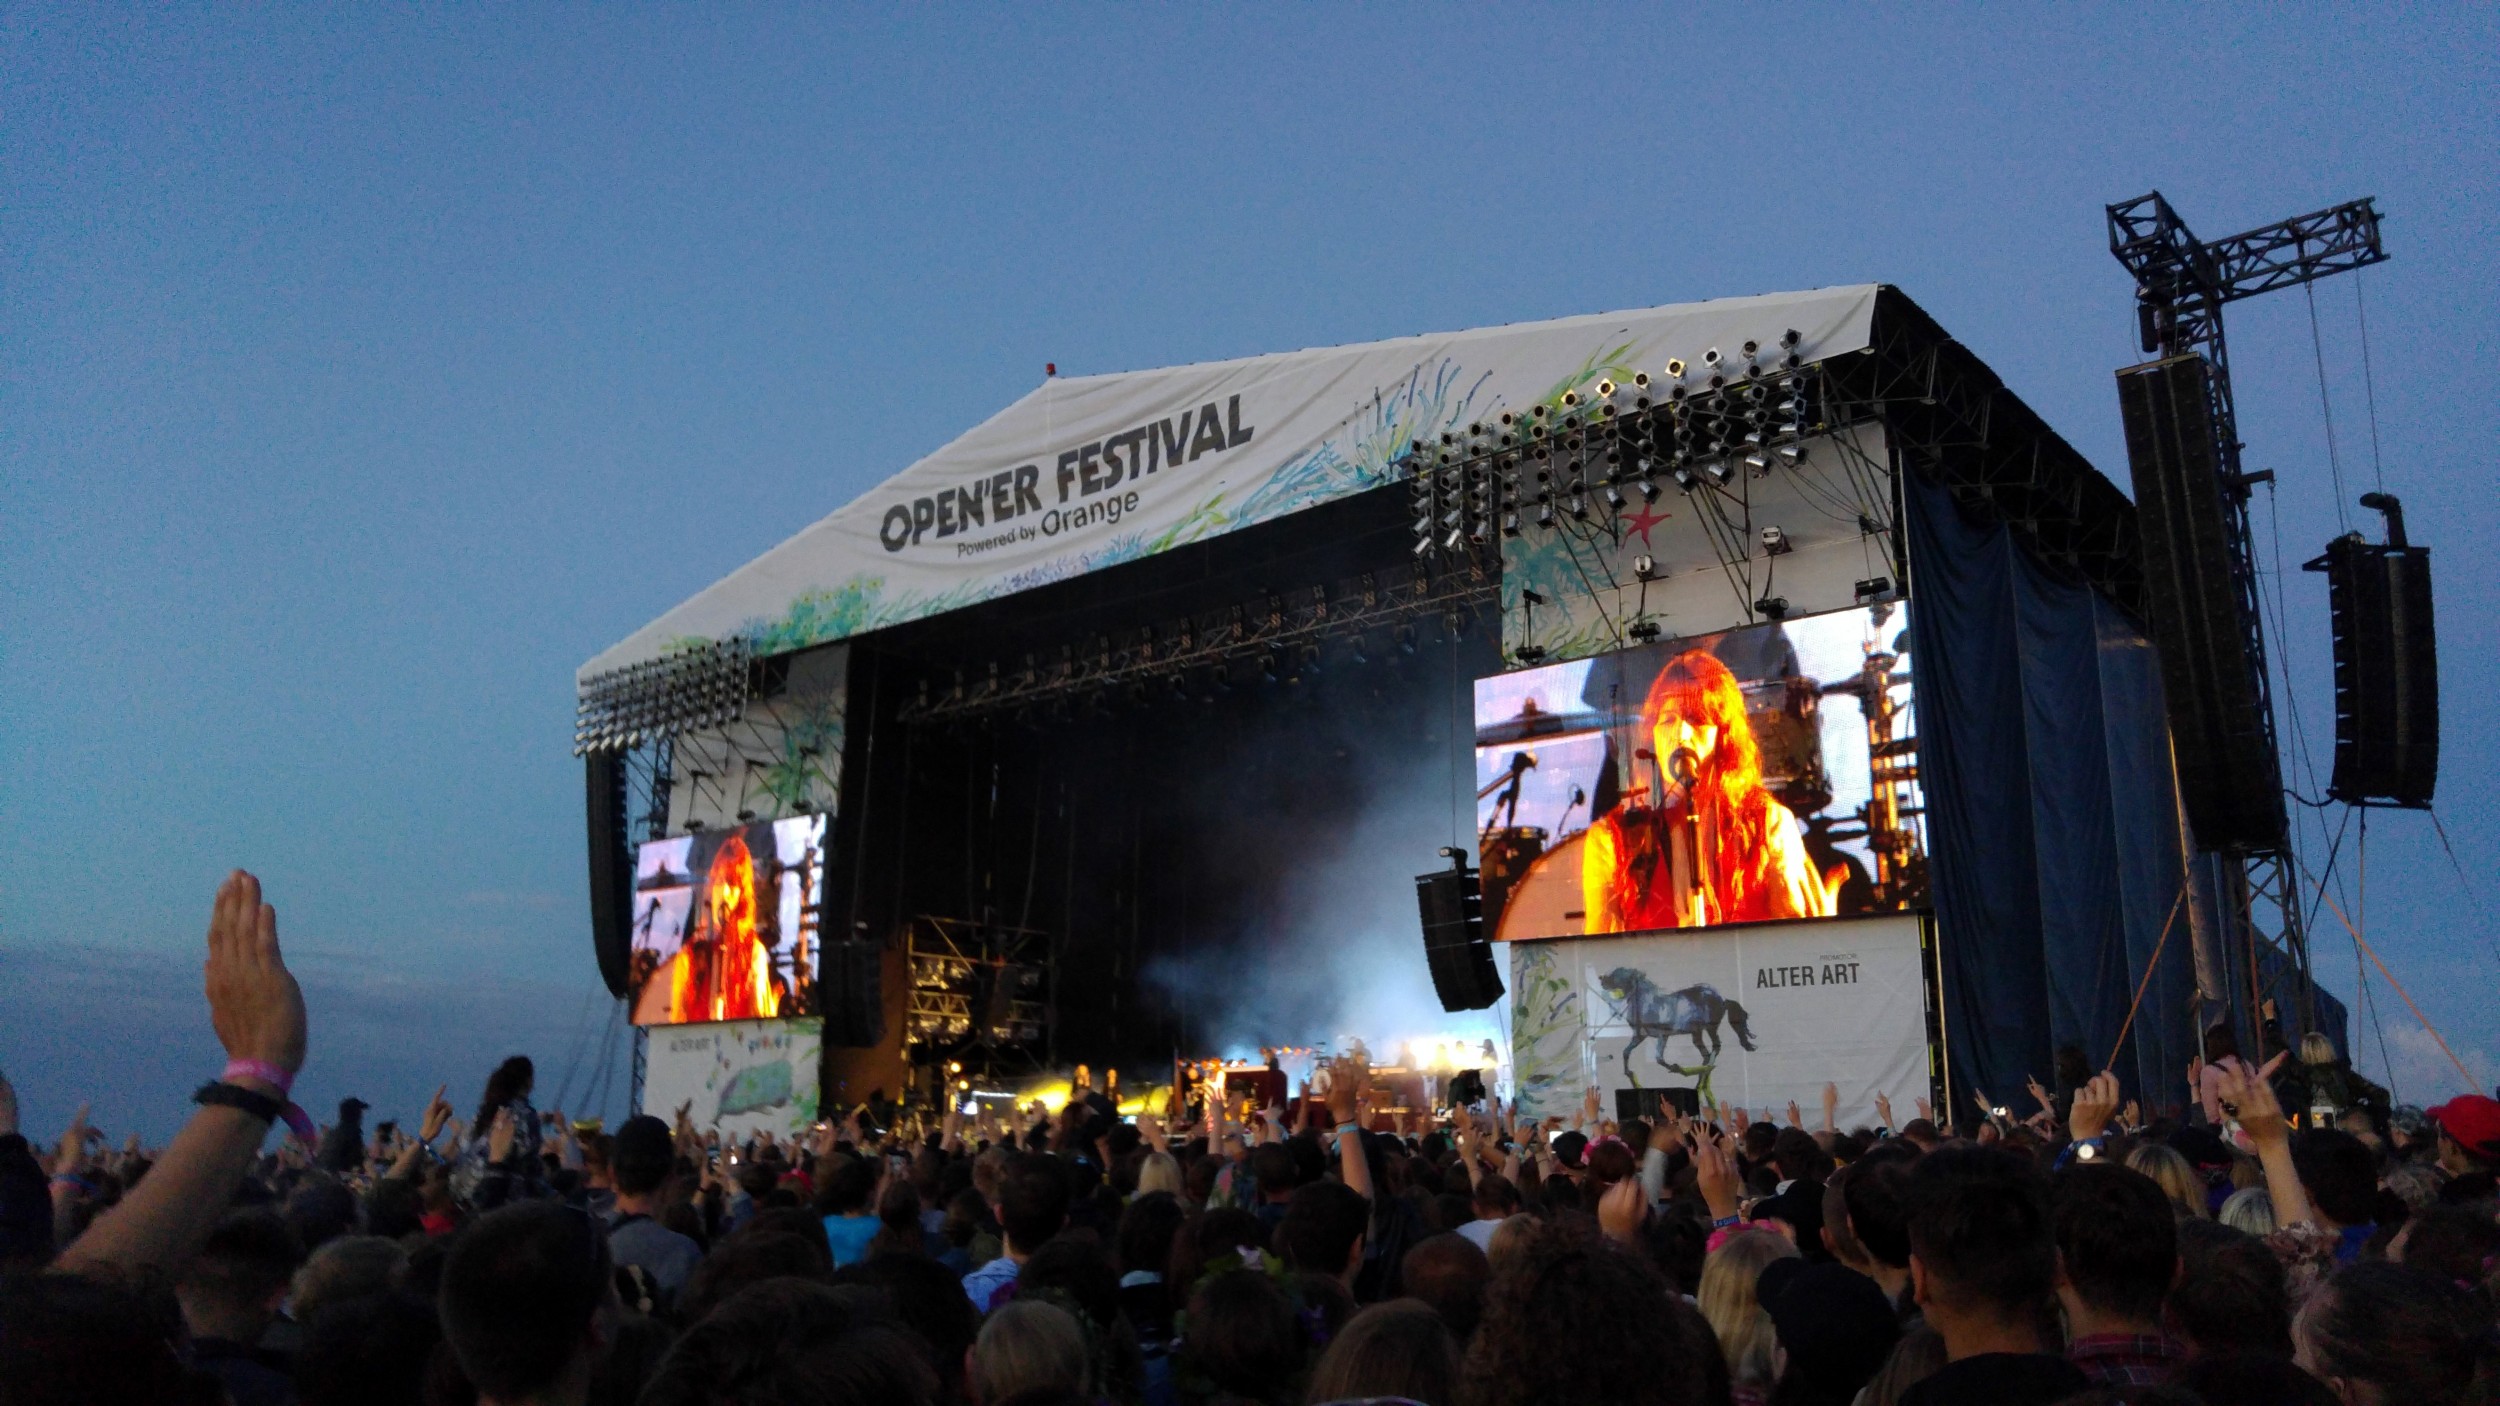 Opener Music Festival 2016 Gdynia Poland Visions Of Travel